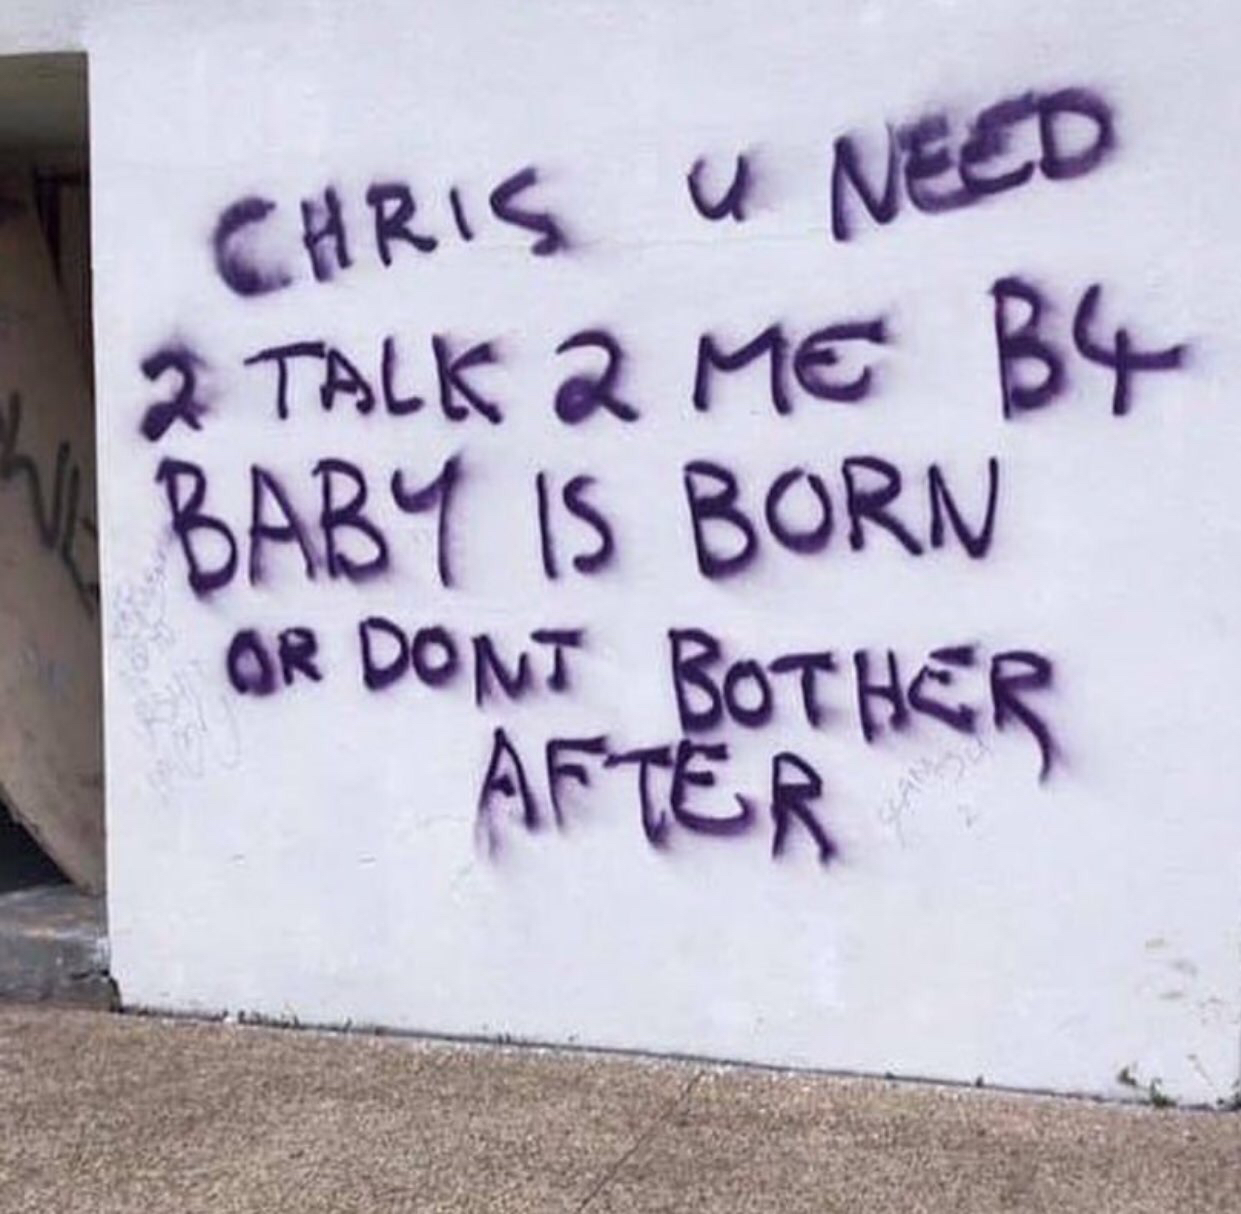 handwriting - Chris U Need 2 Talk 2 Me By Baby Is Born After Or Don'T Bother